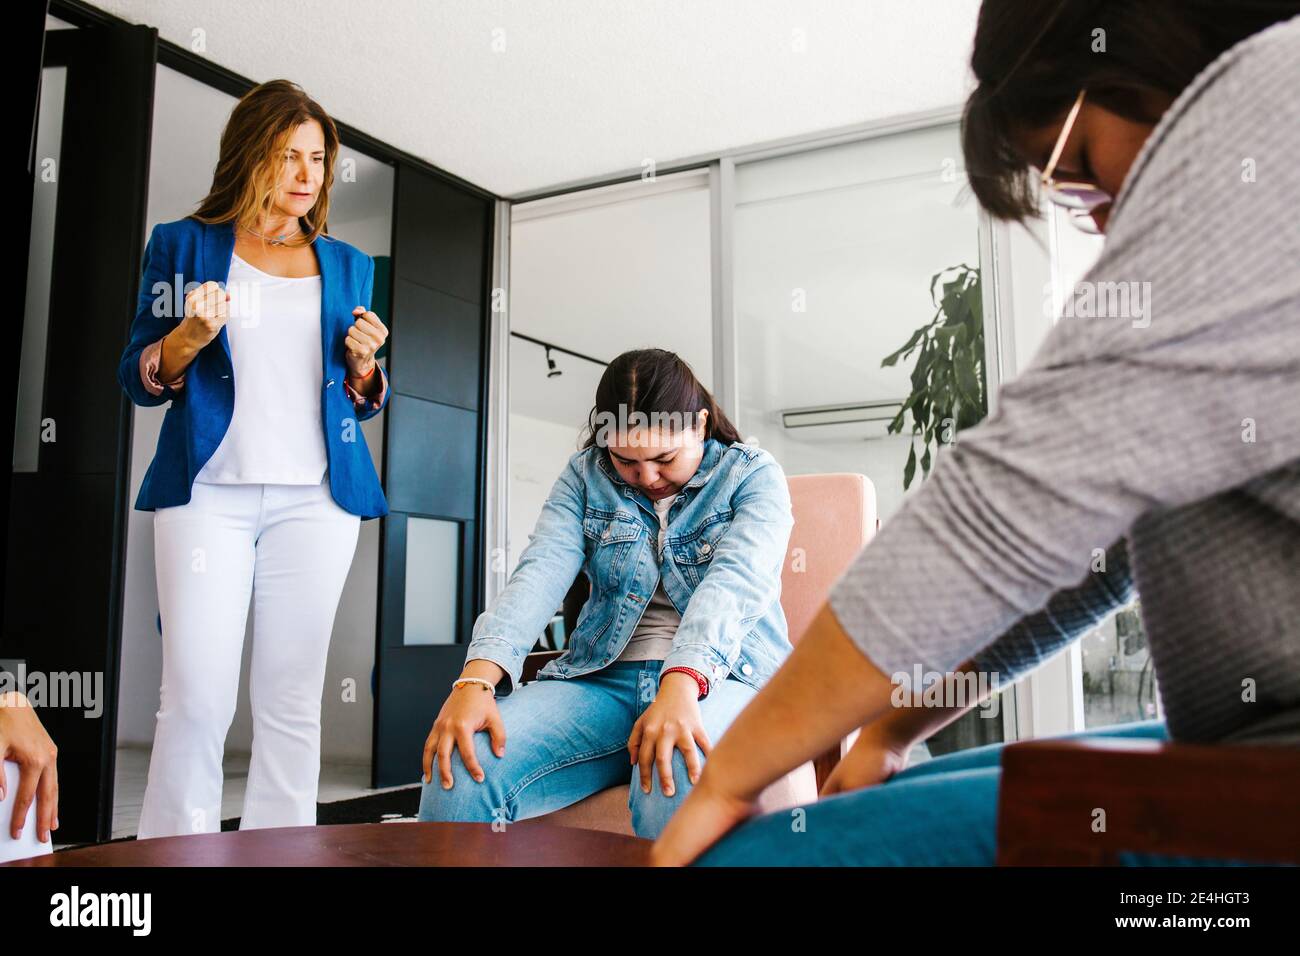 latin business people meditating and doing yoga in office in Mexico city Stock Photo